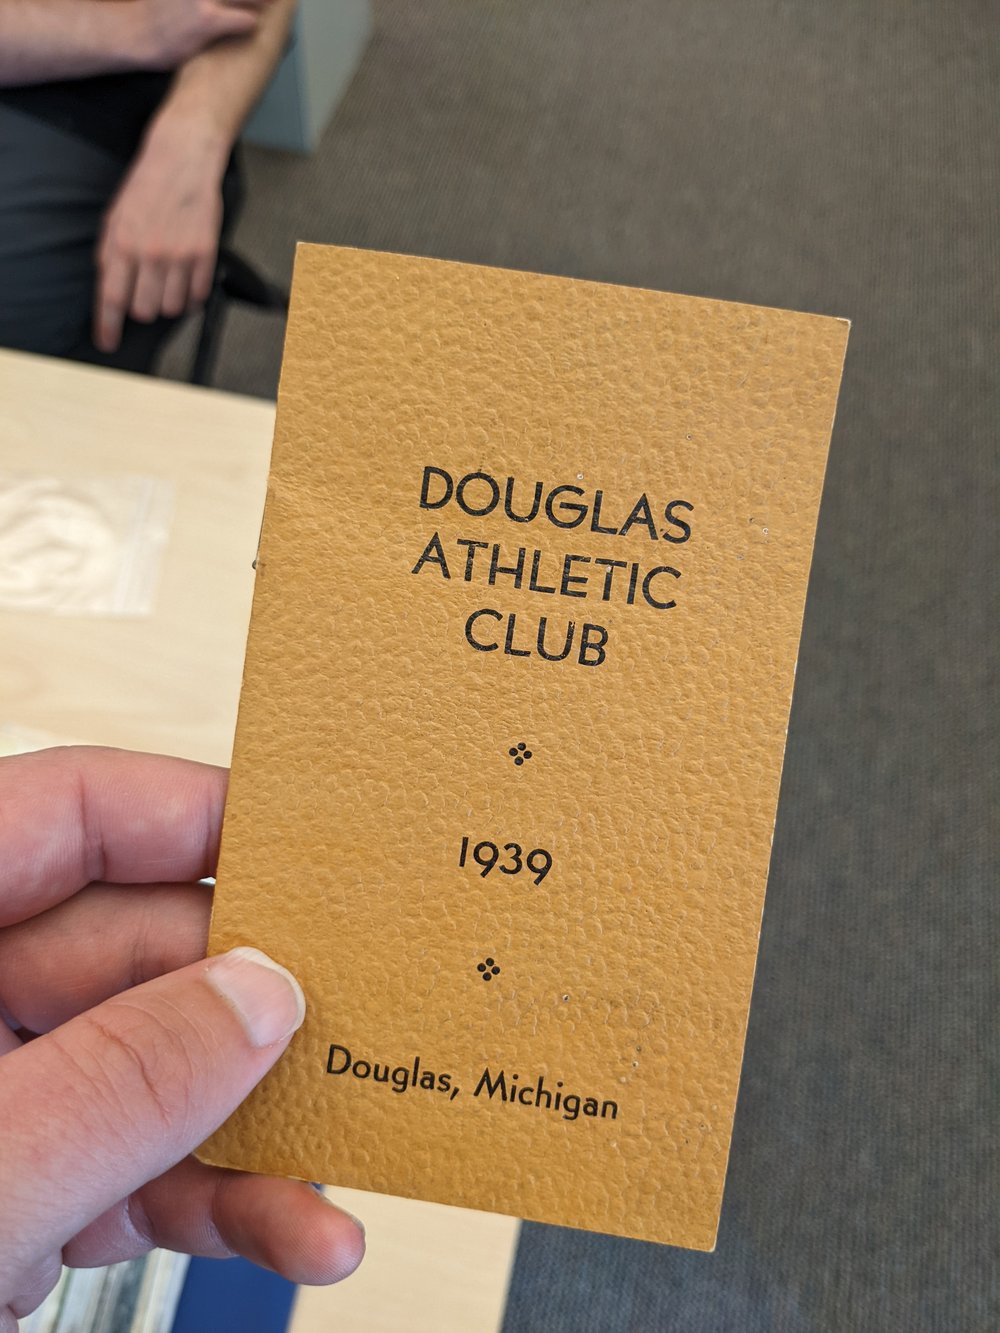  Bylaws for the Douglas Athletic Club, which used the space starting in 1915, after it was briefly used as an Odd Fellows Hall 